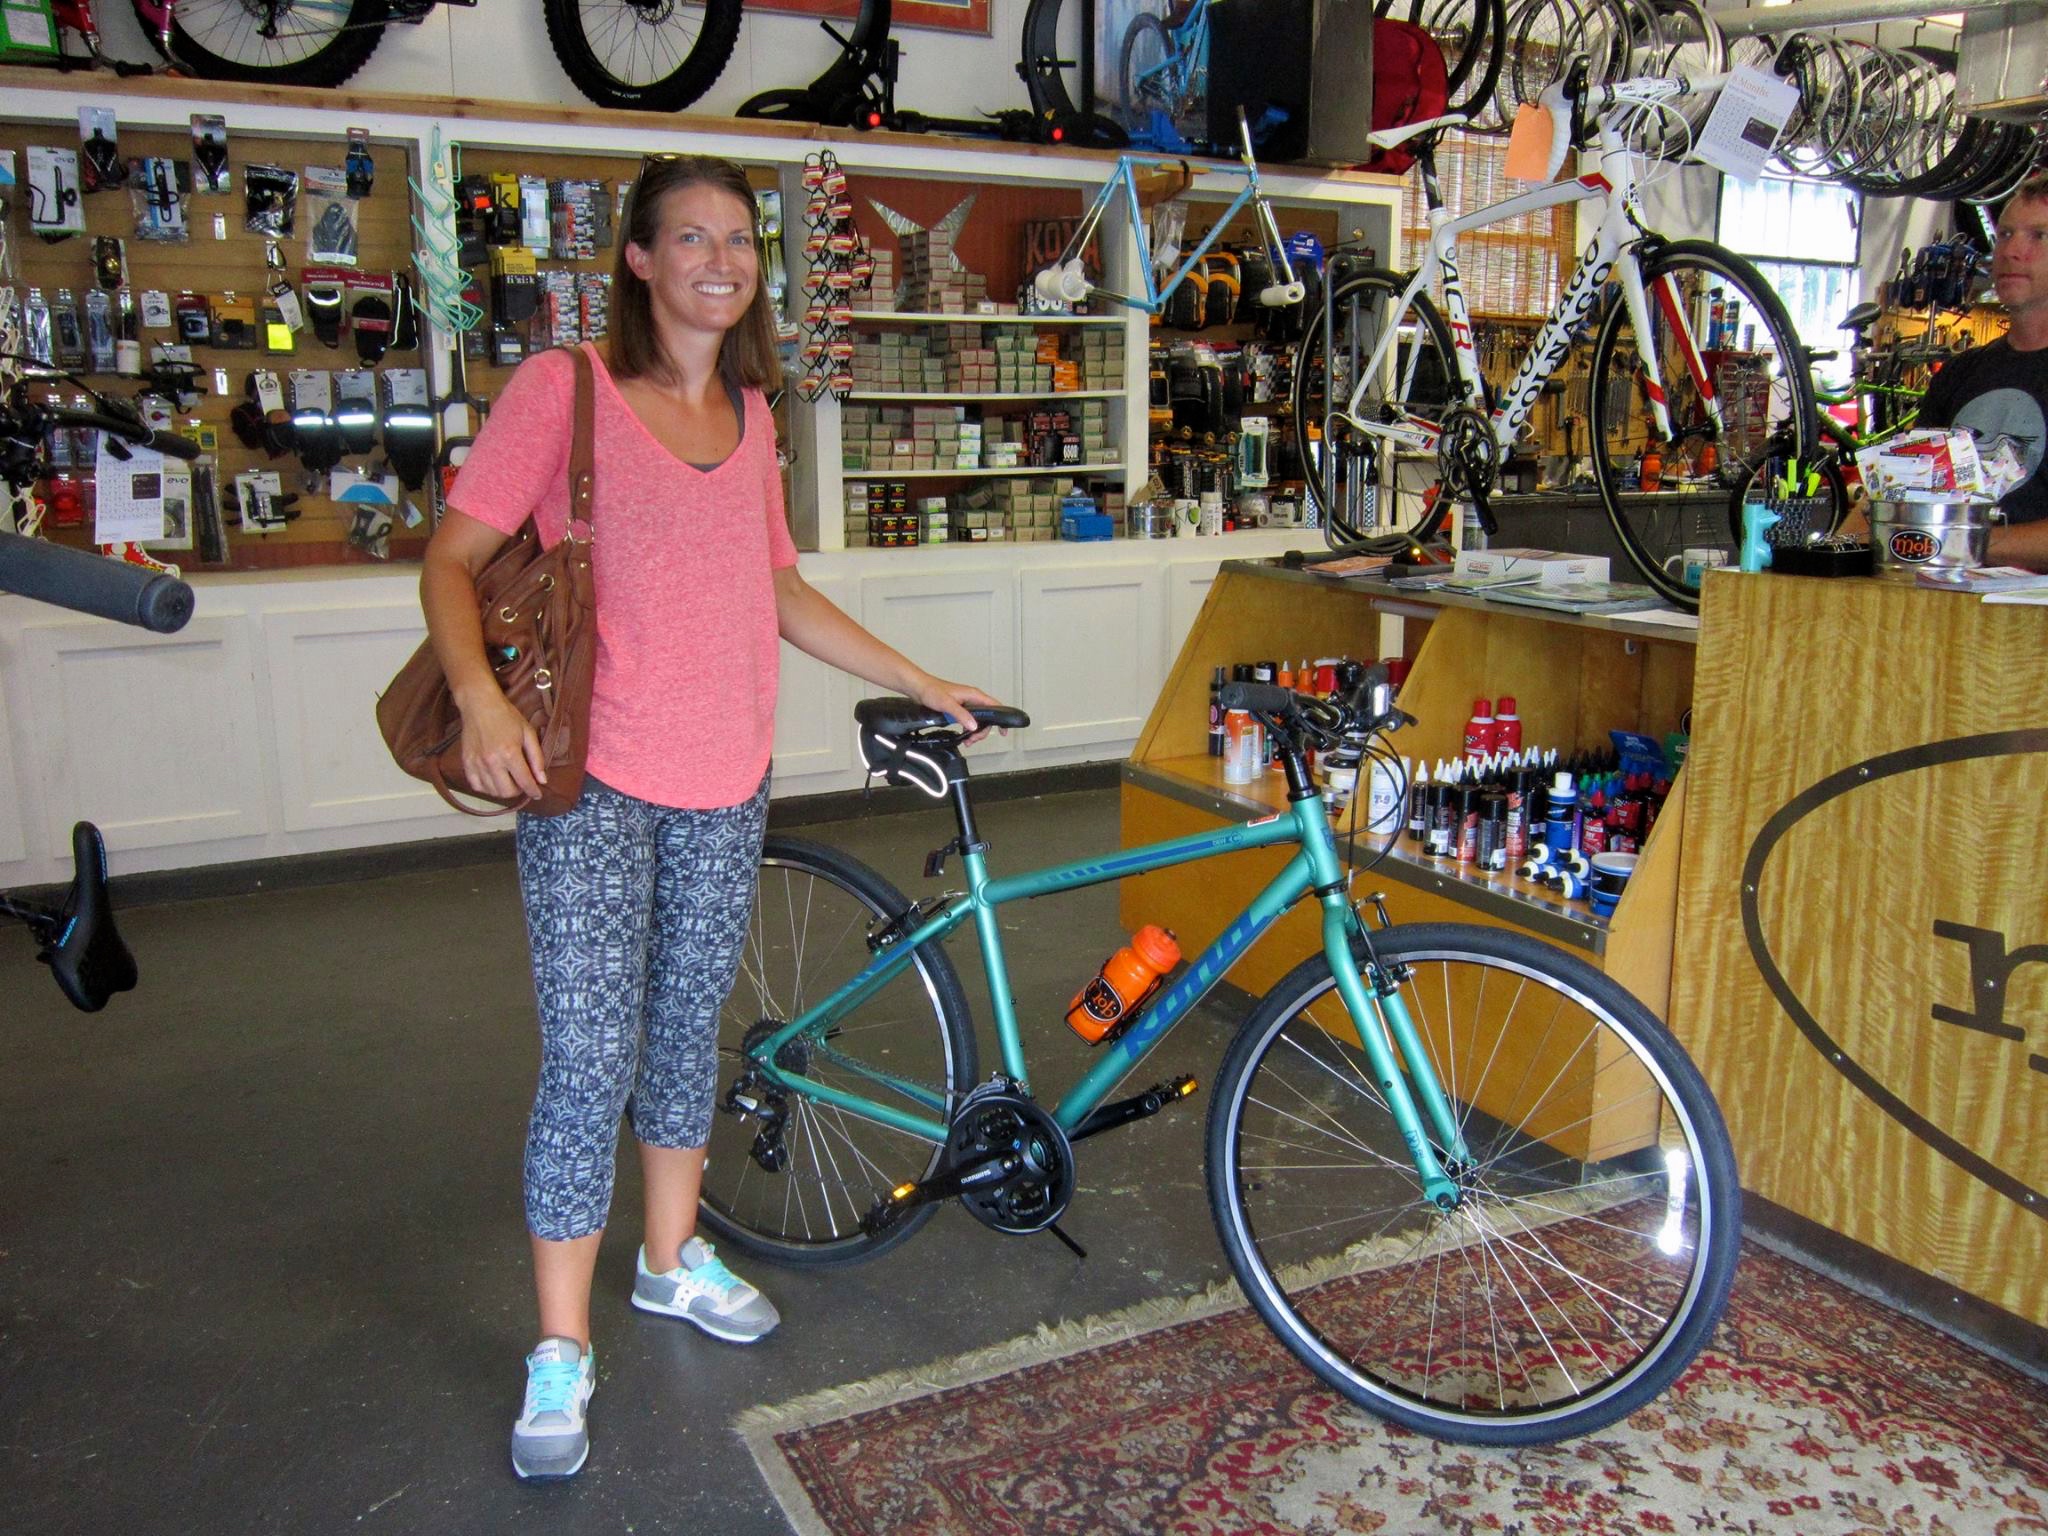 Erin with her new Kona Dew. She is ready to ride with friends on her new Kona Bicycle. Looking Good!